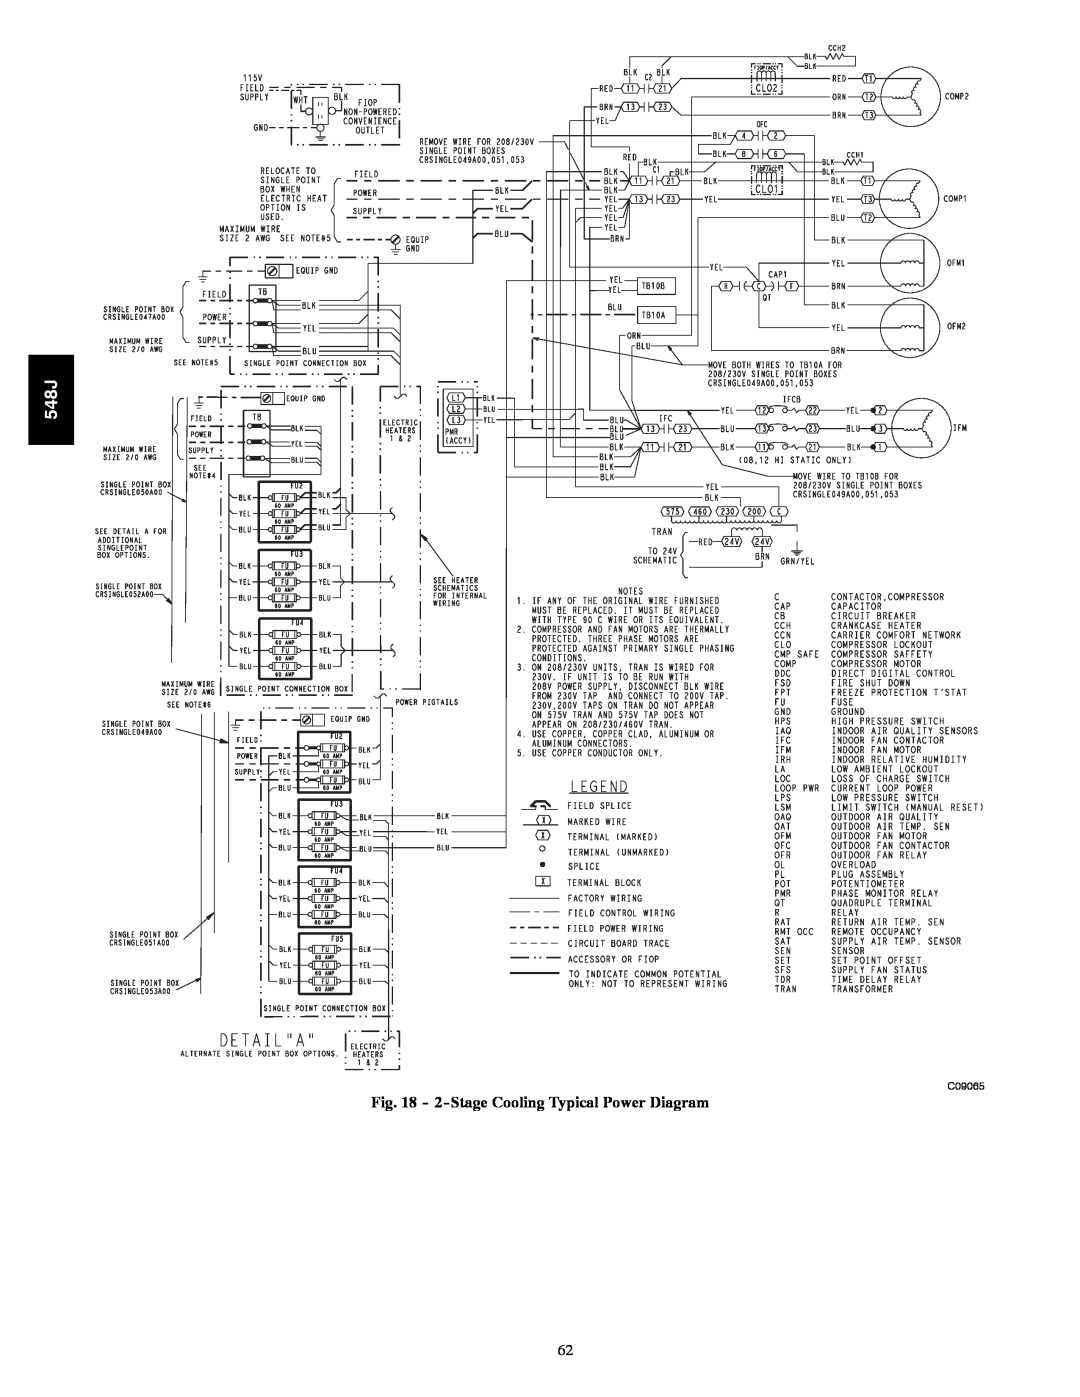 Bryant 548J manual 2-StageCooling Typical Power Diagram, C09065 